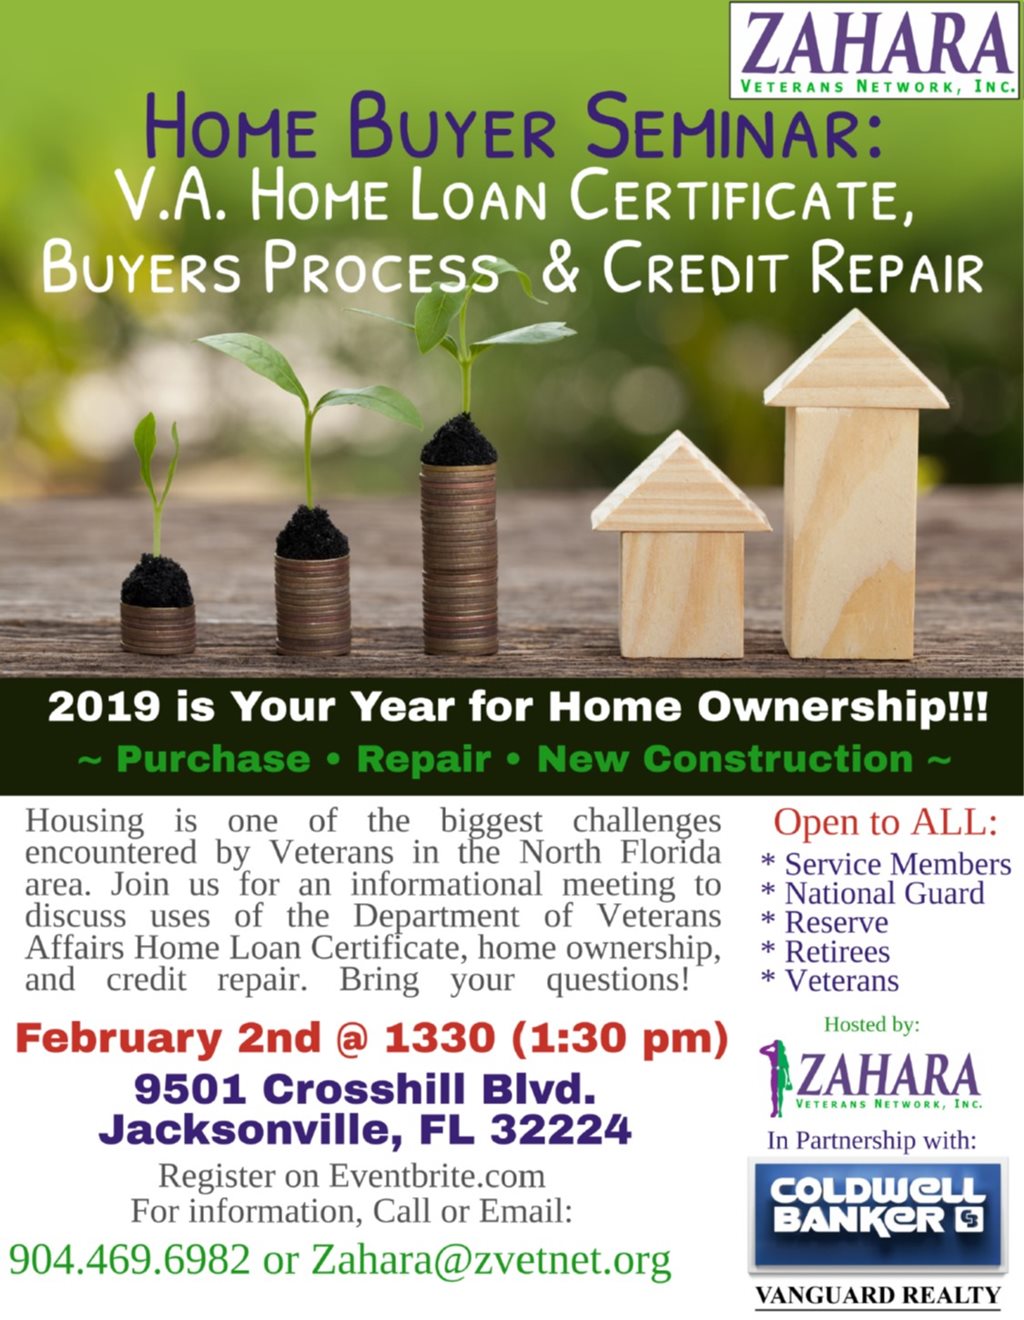 Zahara Veterans Network, Inc. is hosting a Home Buyer Seminar: VA Home Loan Certificate, Buyers Process and Credit Repair. This event is open to all service members, retirees, veterans, National Guard, and Reserve. 